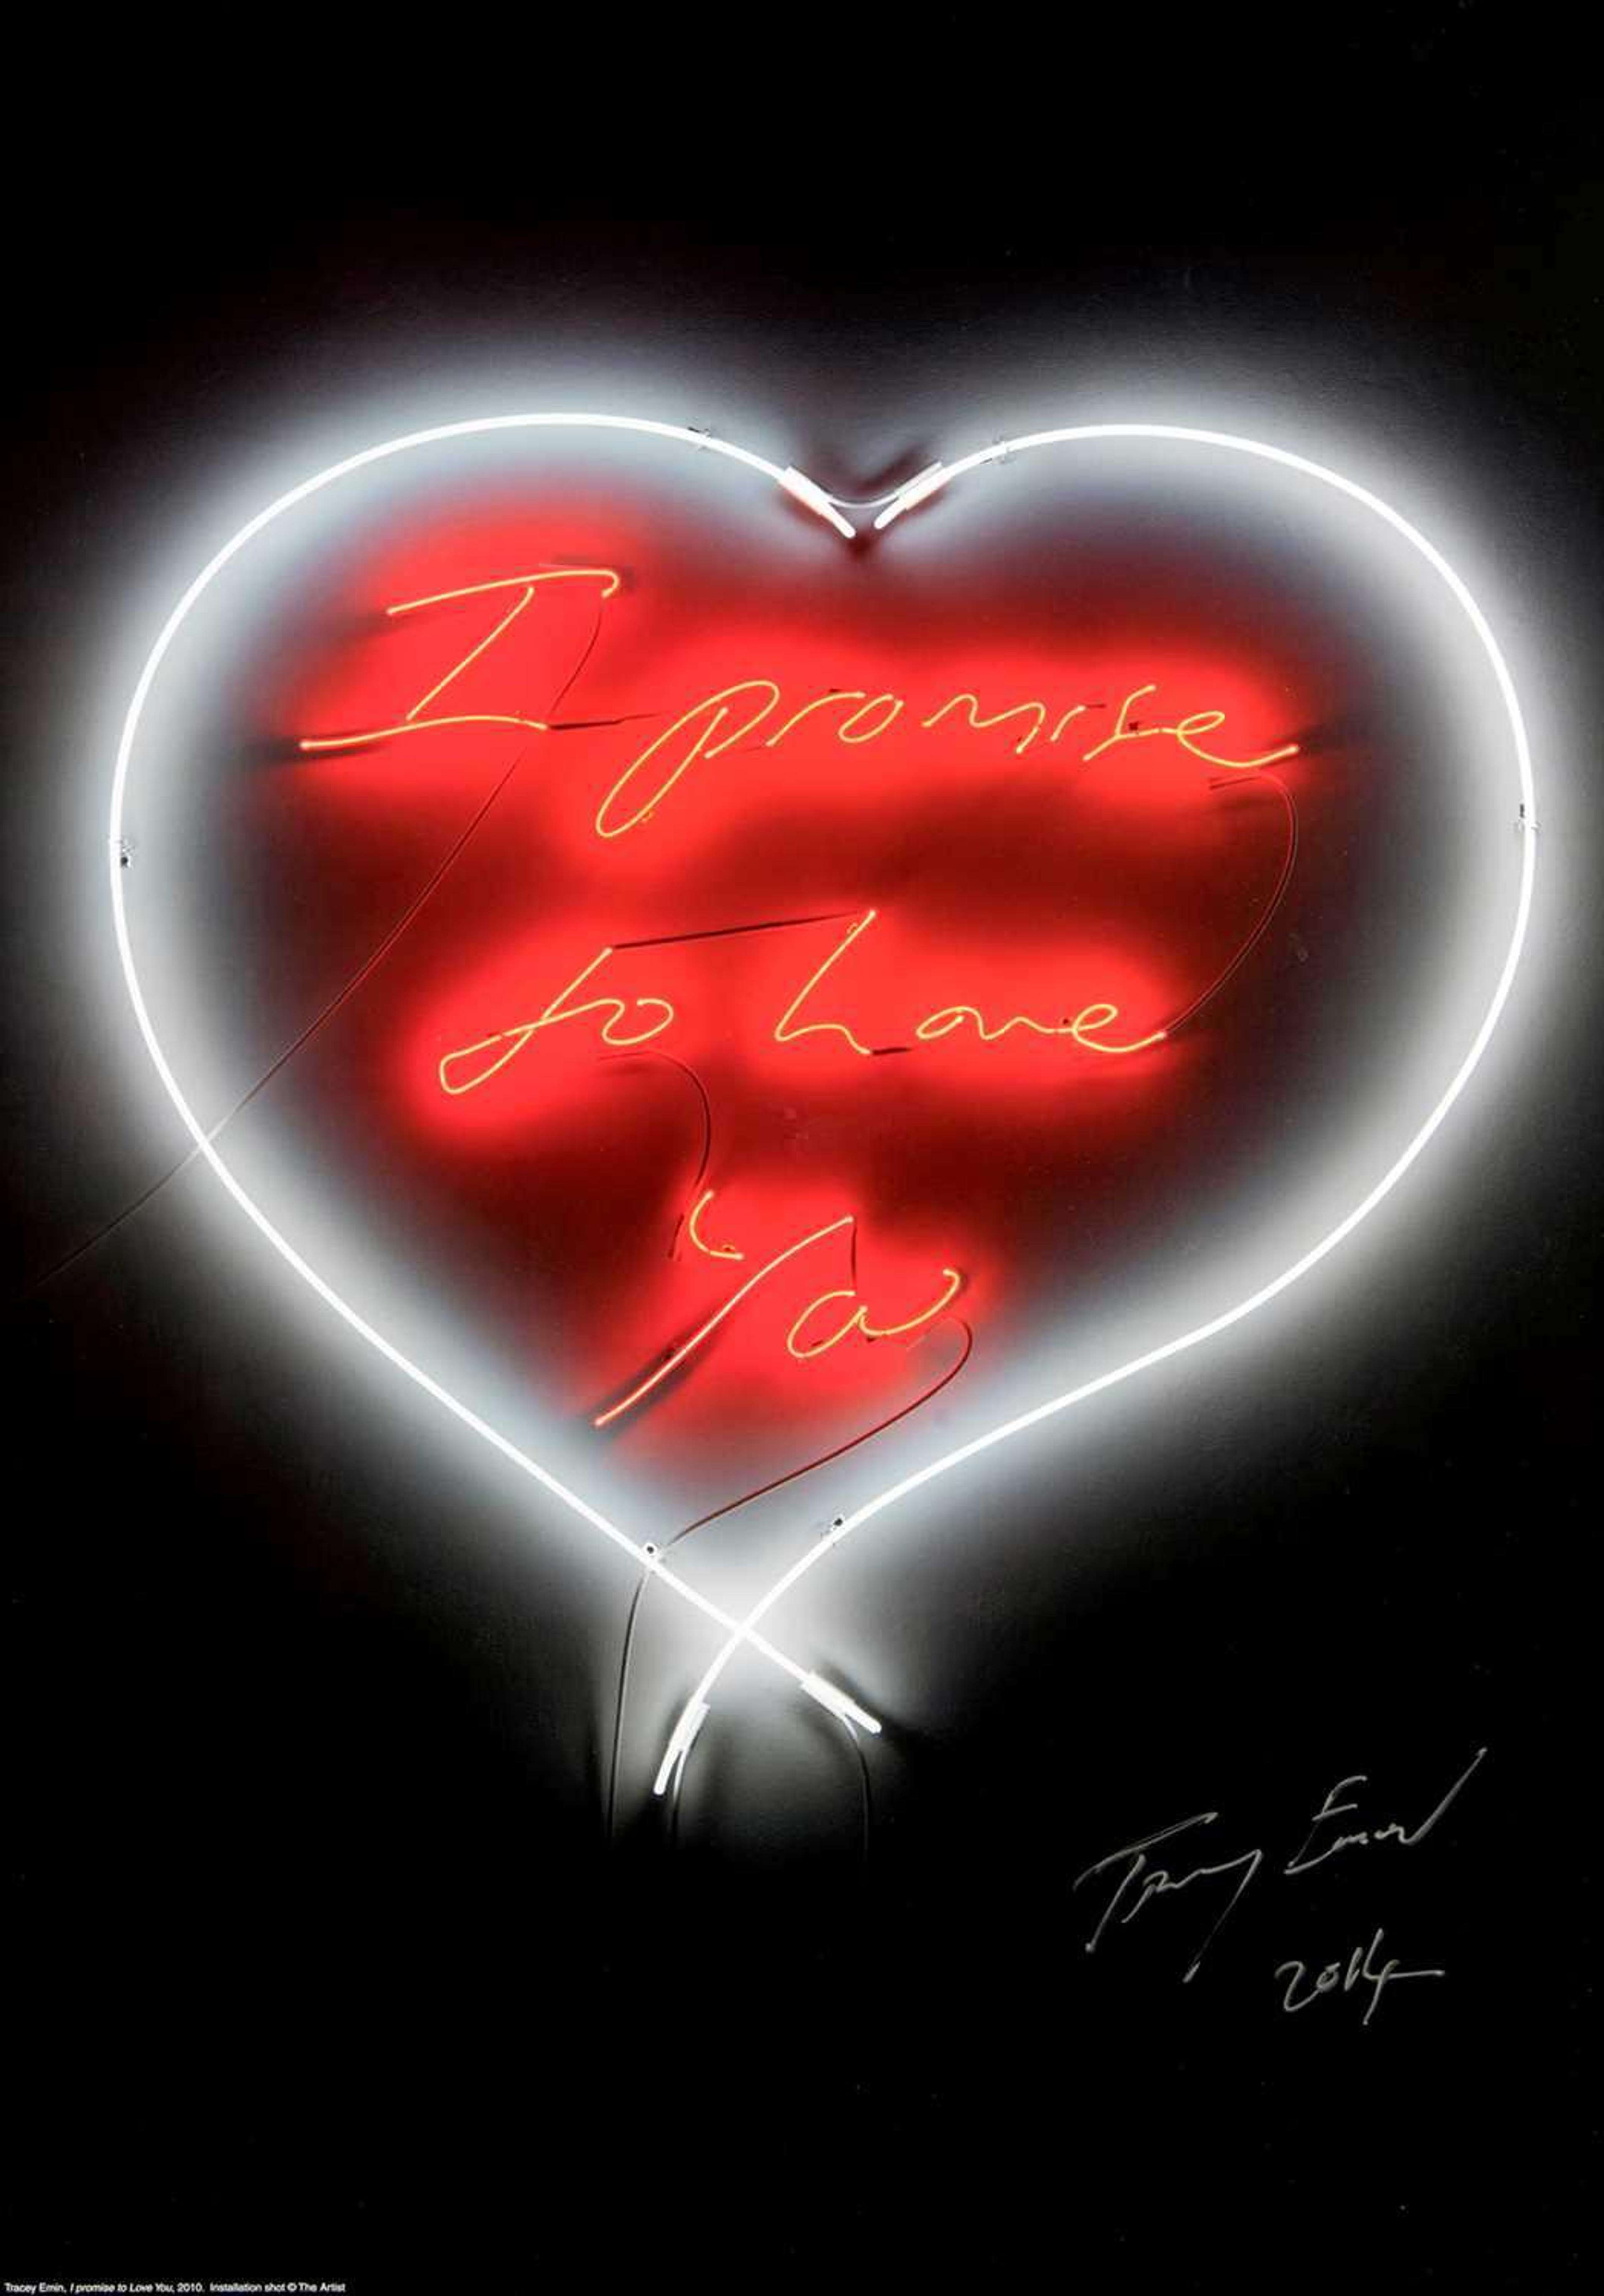 A Look At Tracey Emin's Neon Works